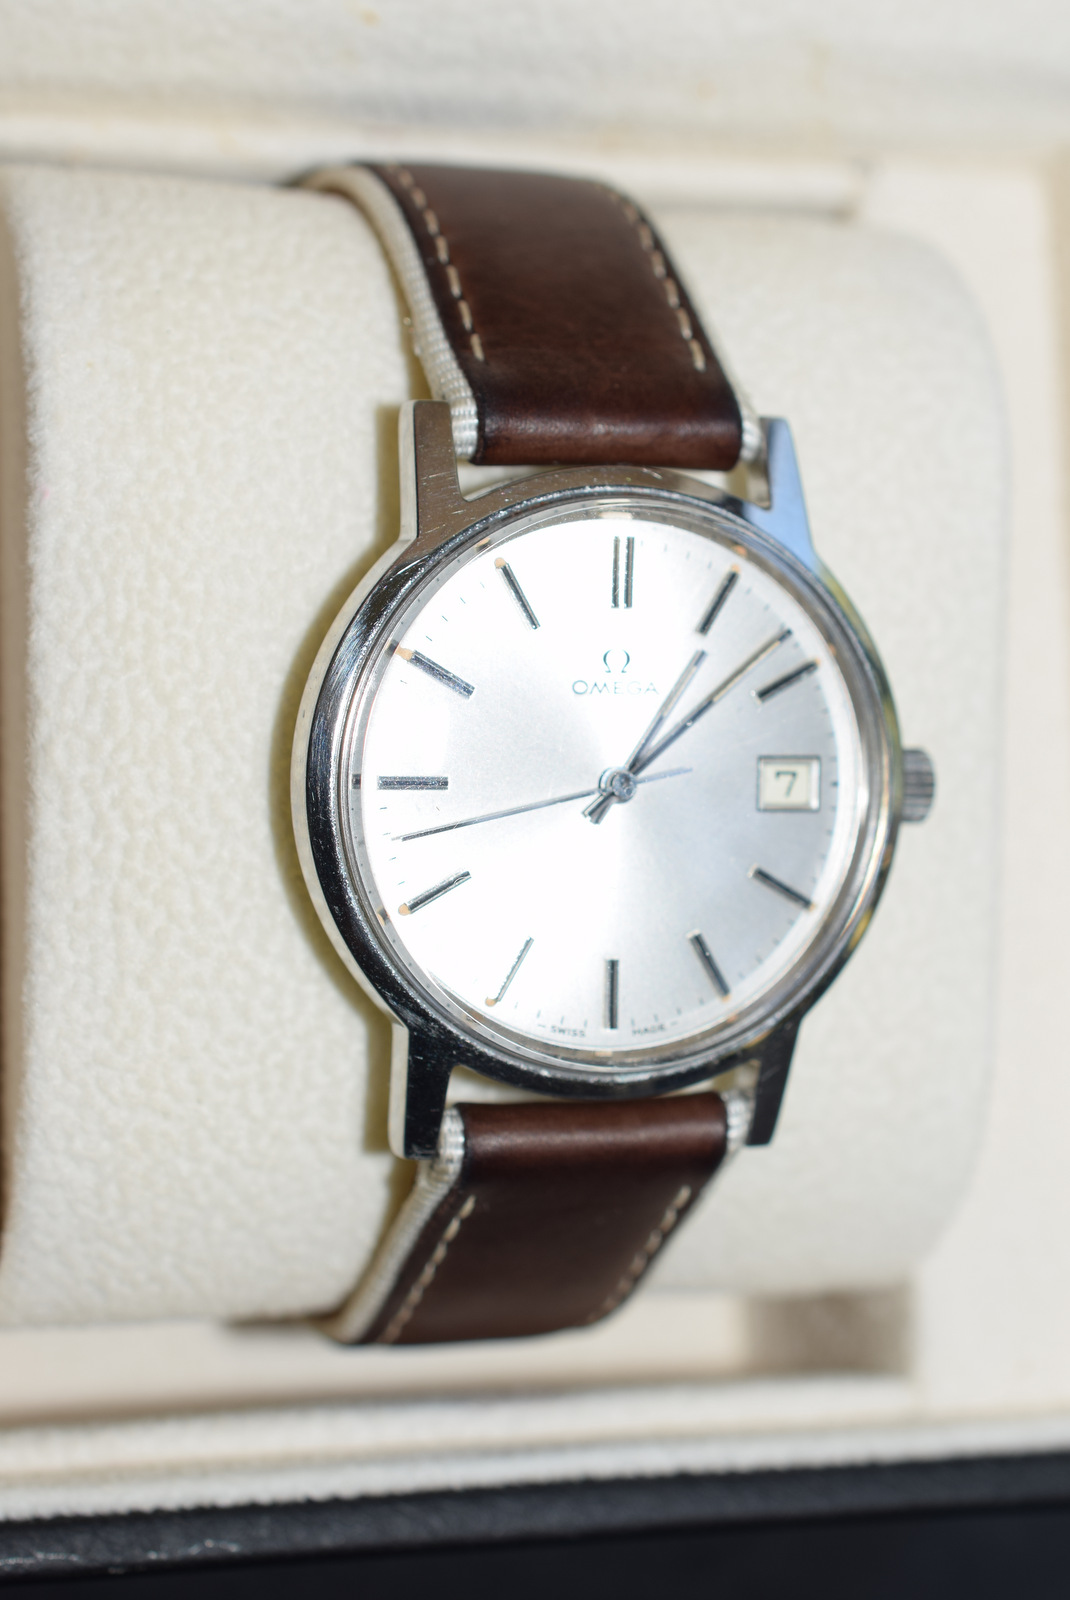 Vintage Omega Manual Wind Date Watch - Image 8 of 18